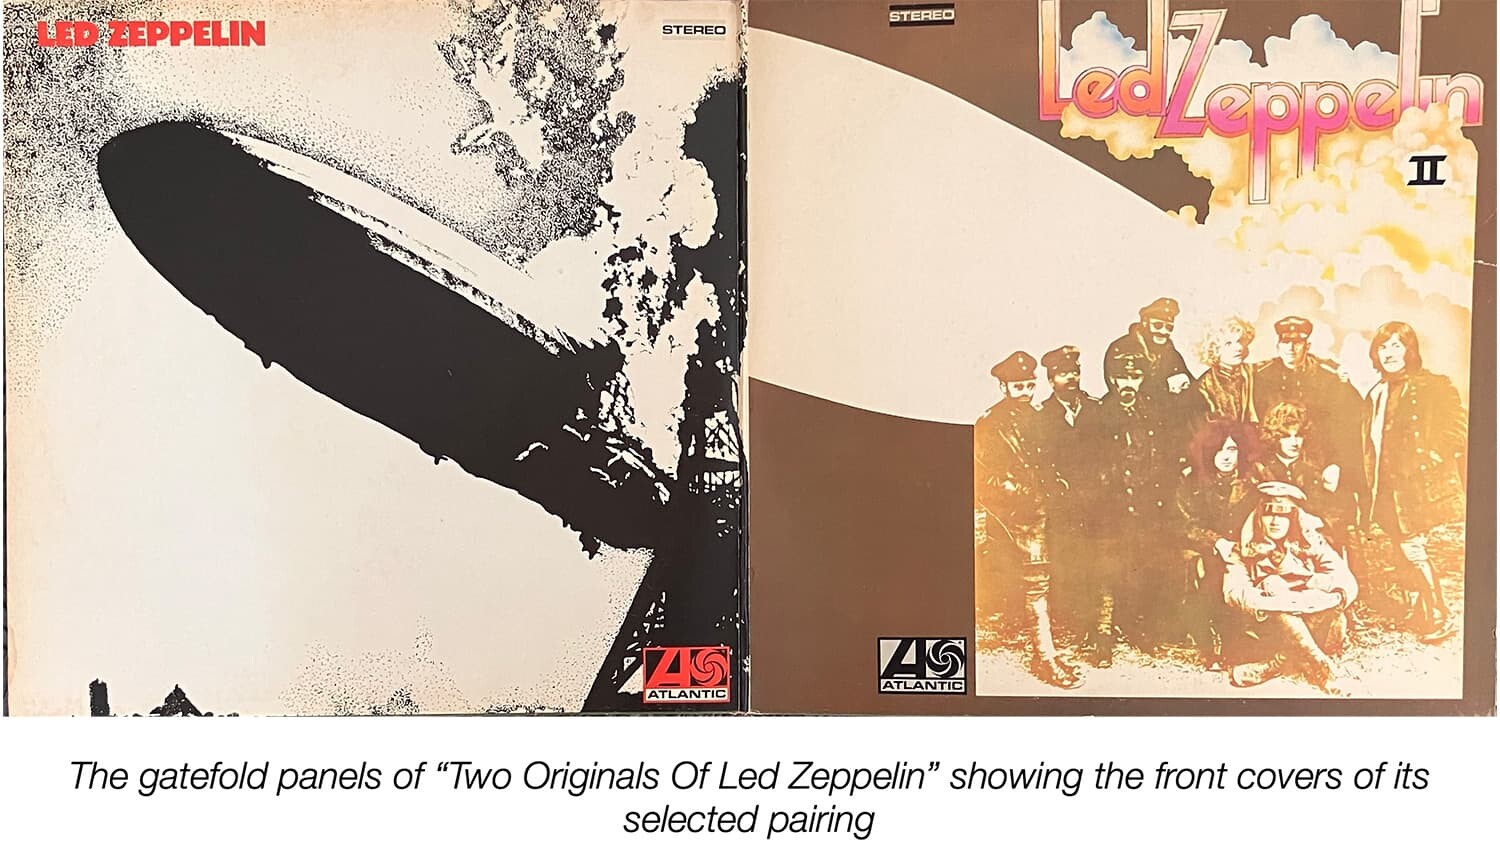 Led Zeppelin one and two hot cut